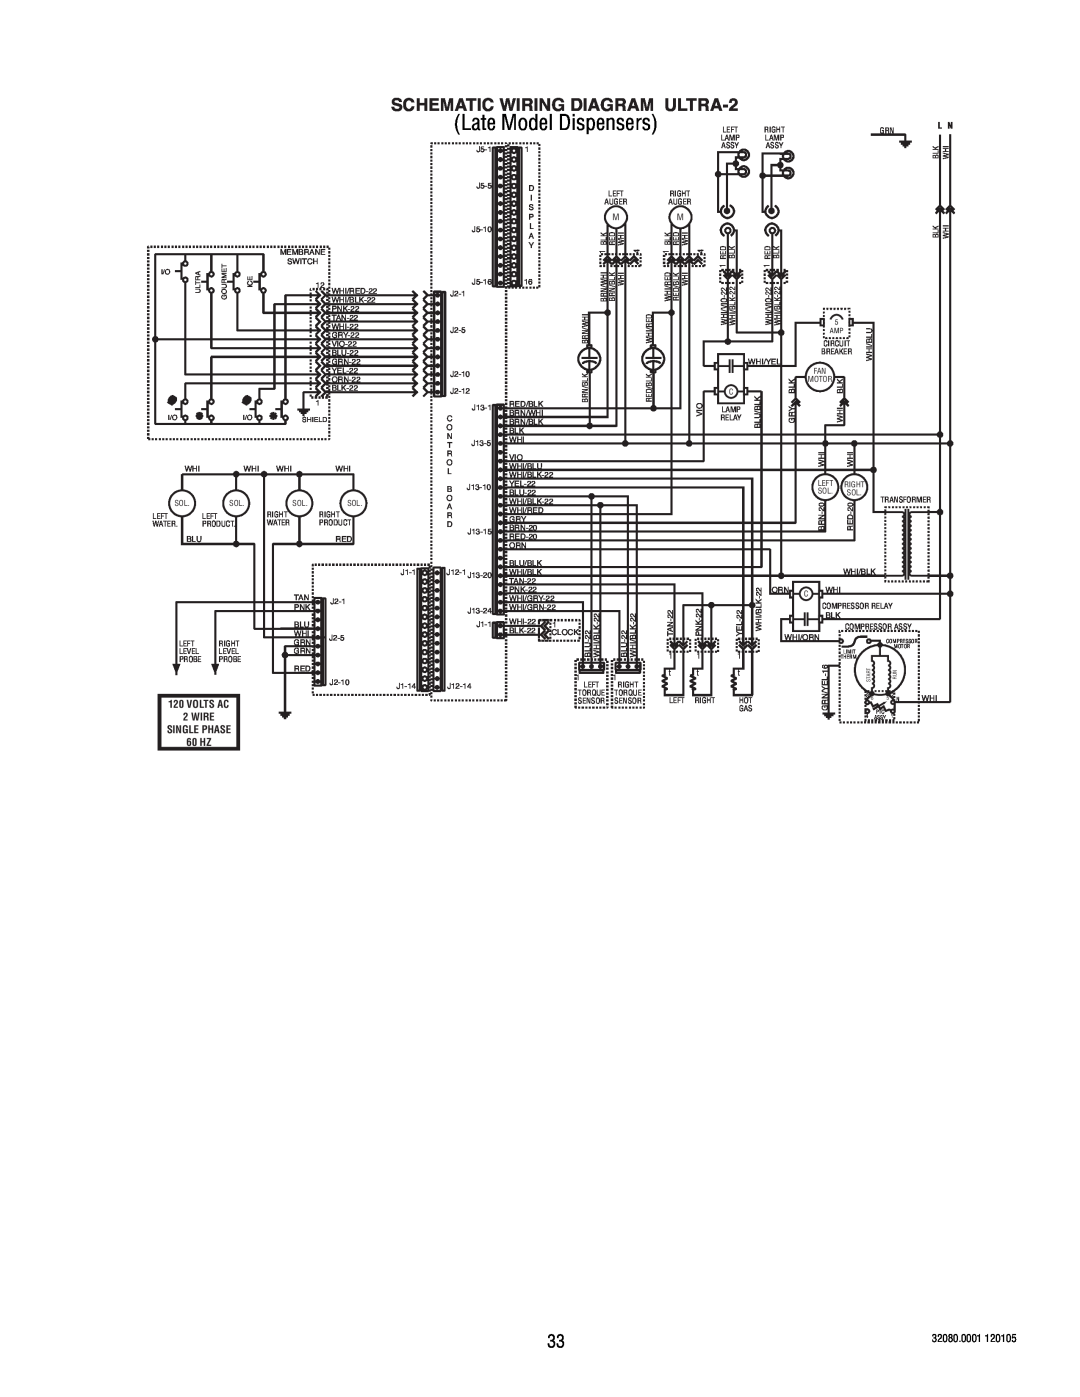 Bunn manual SCHEMATIC WIRING DIAGRAM ULTRA-2, 32080.0001, 60 HZ, Volts Ac, Wire, Single Phase 